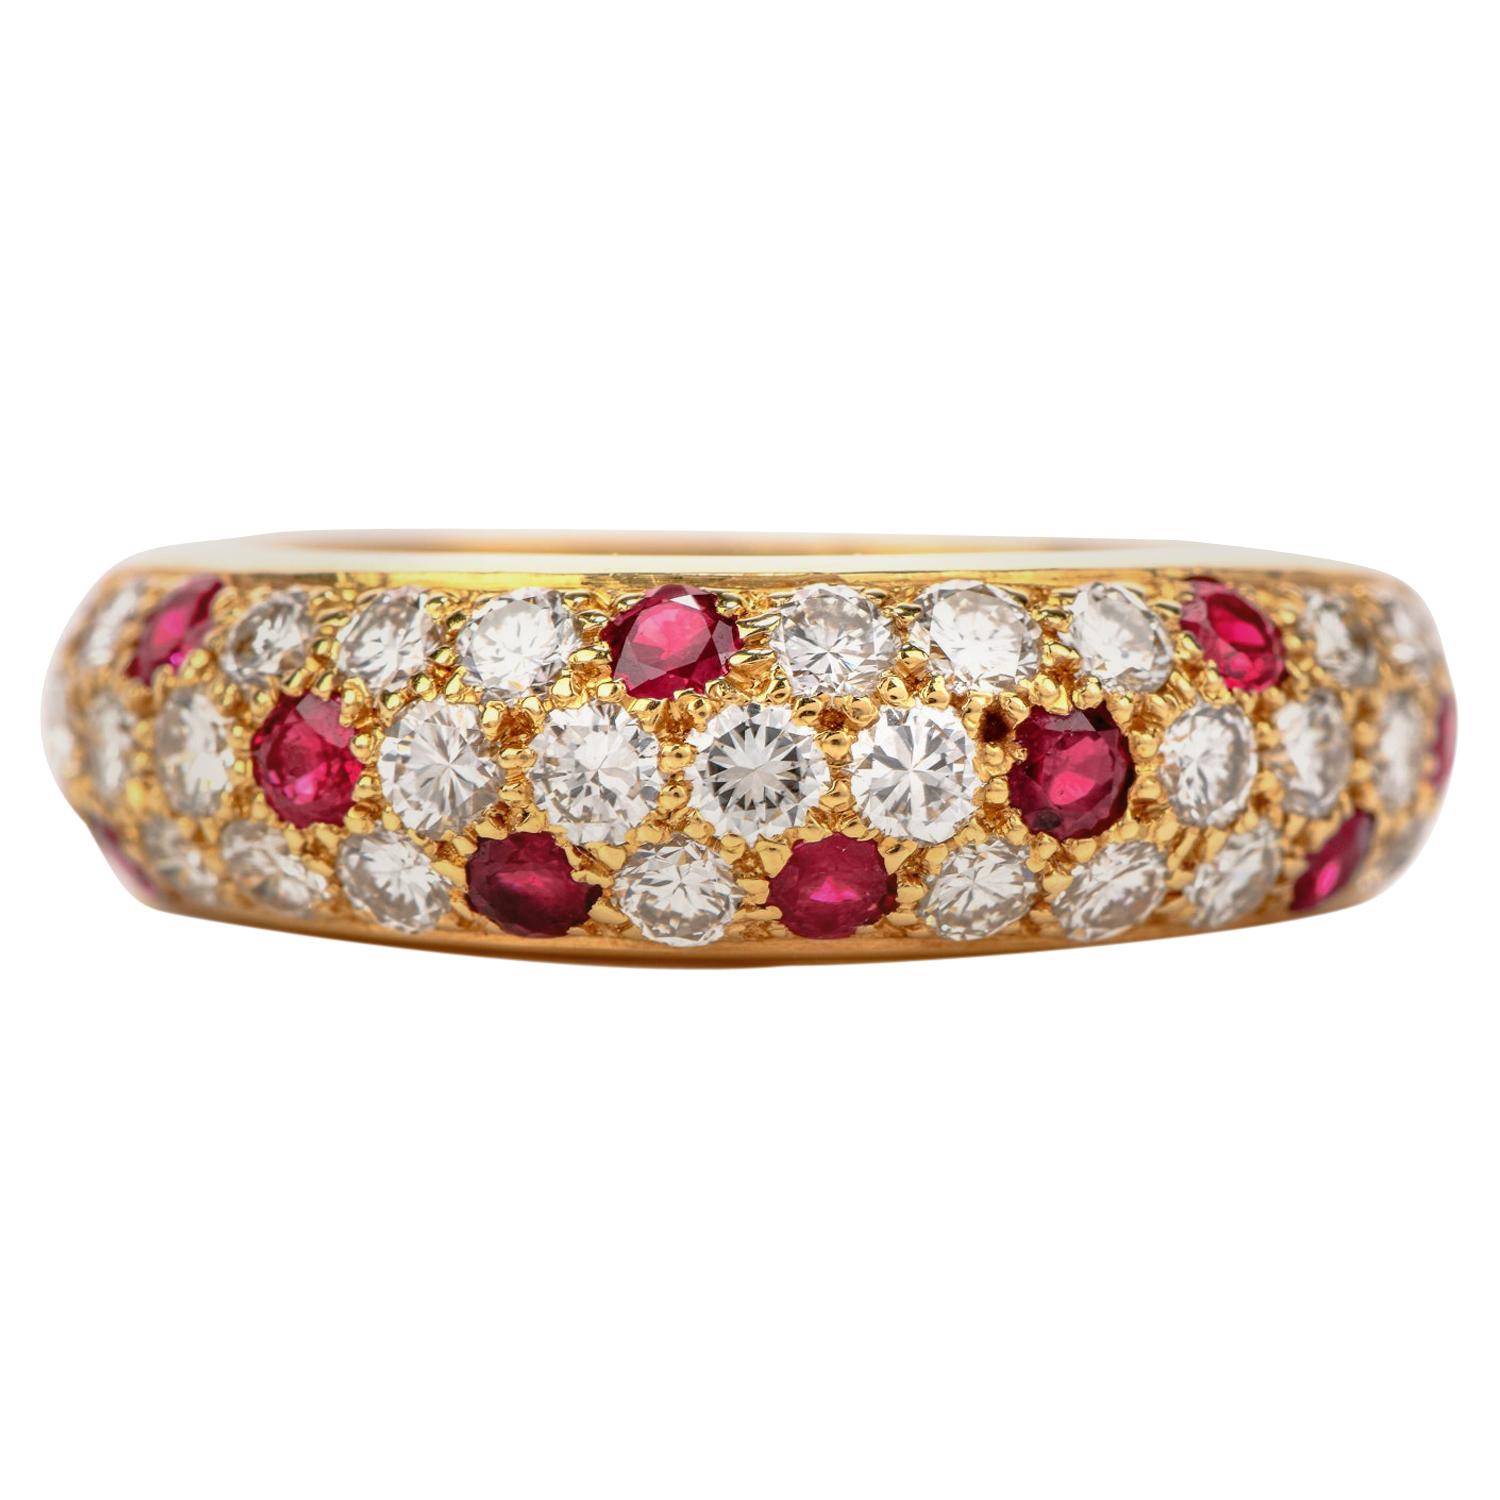 Cartier Vintage Diamond Ruby 18 Karat Gold Pave Dome Bombe Band Ring